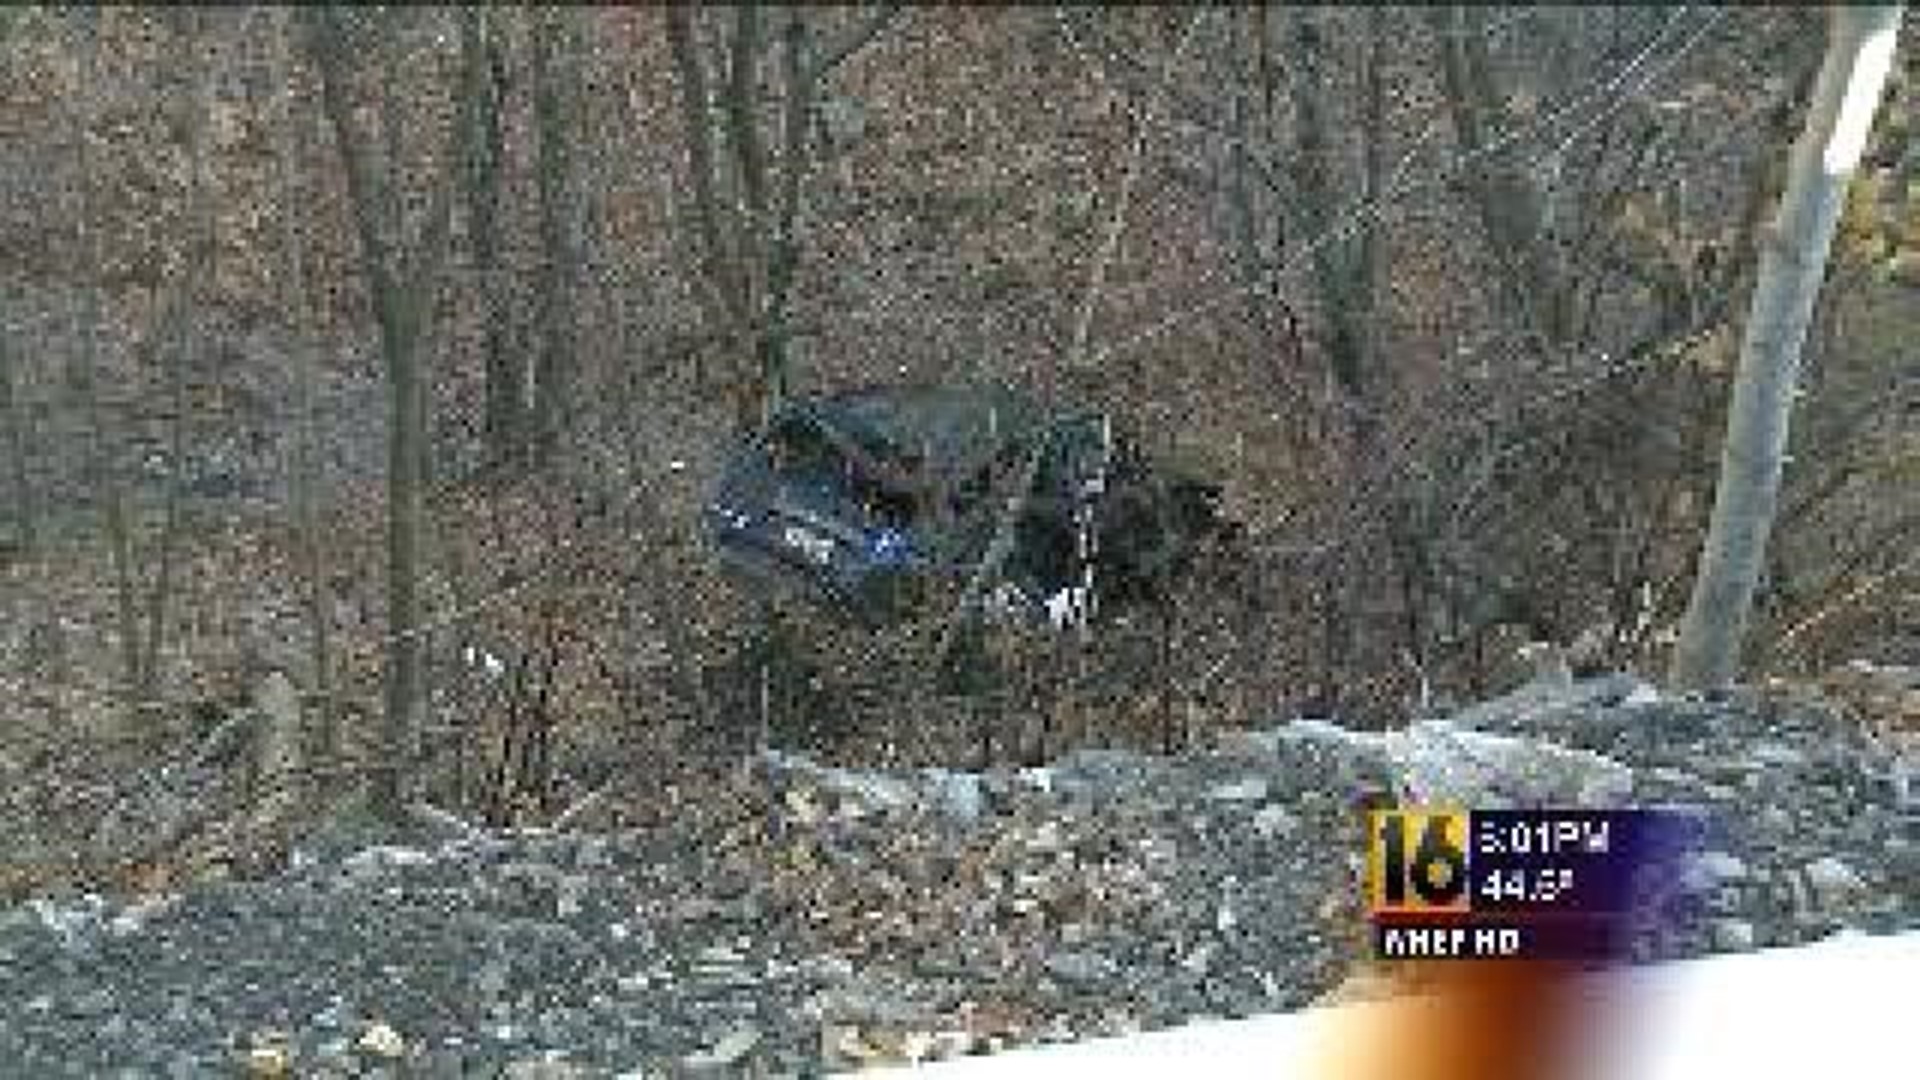 Police Search for Driver of SUV After Crash